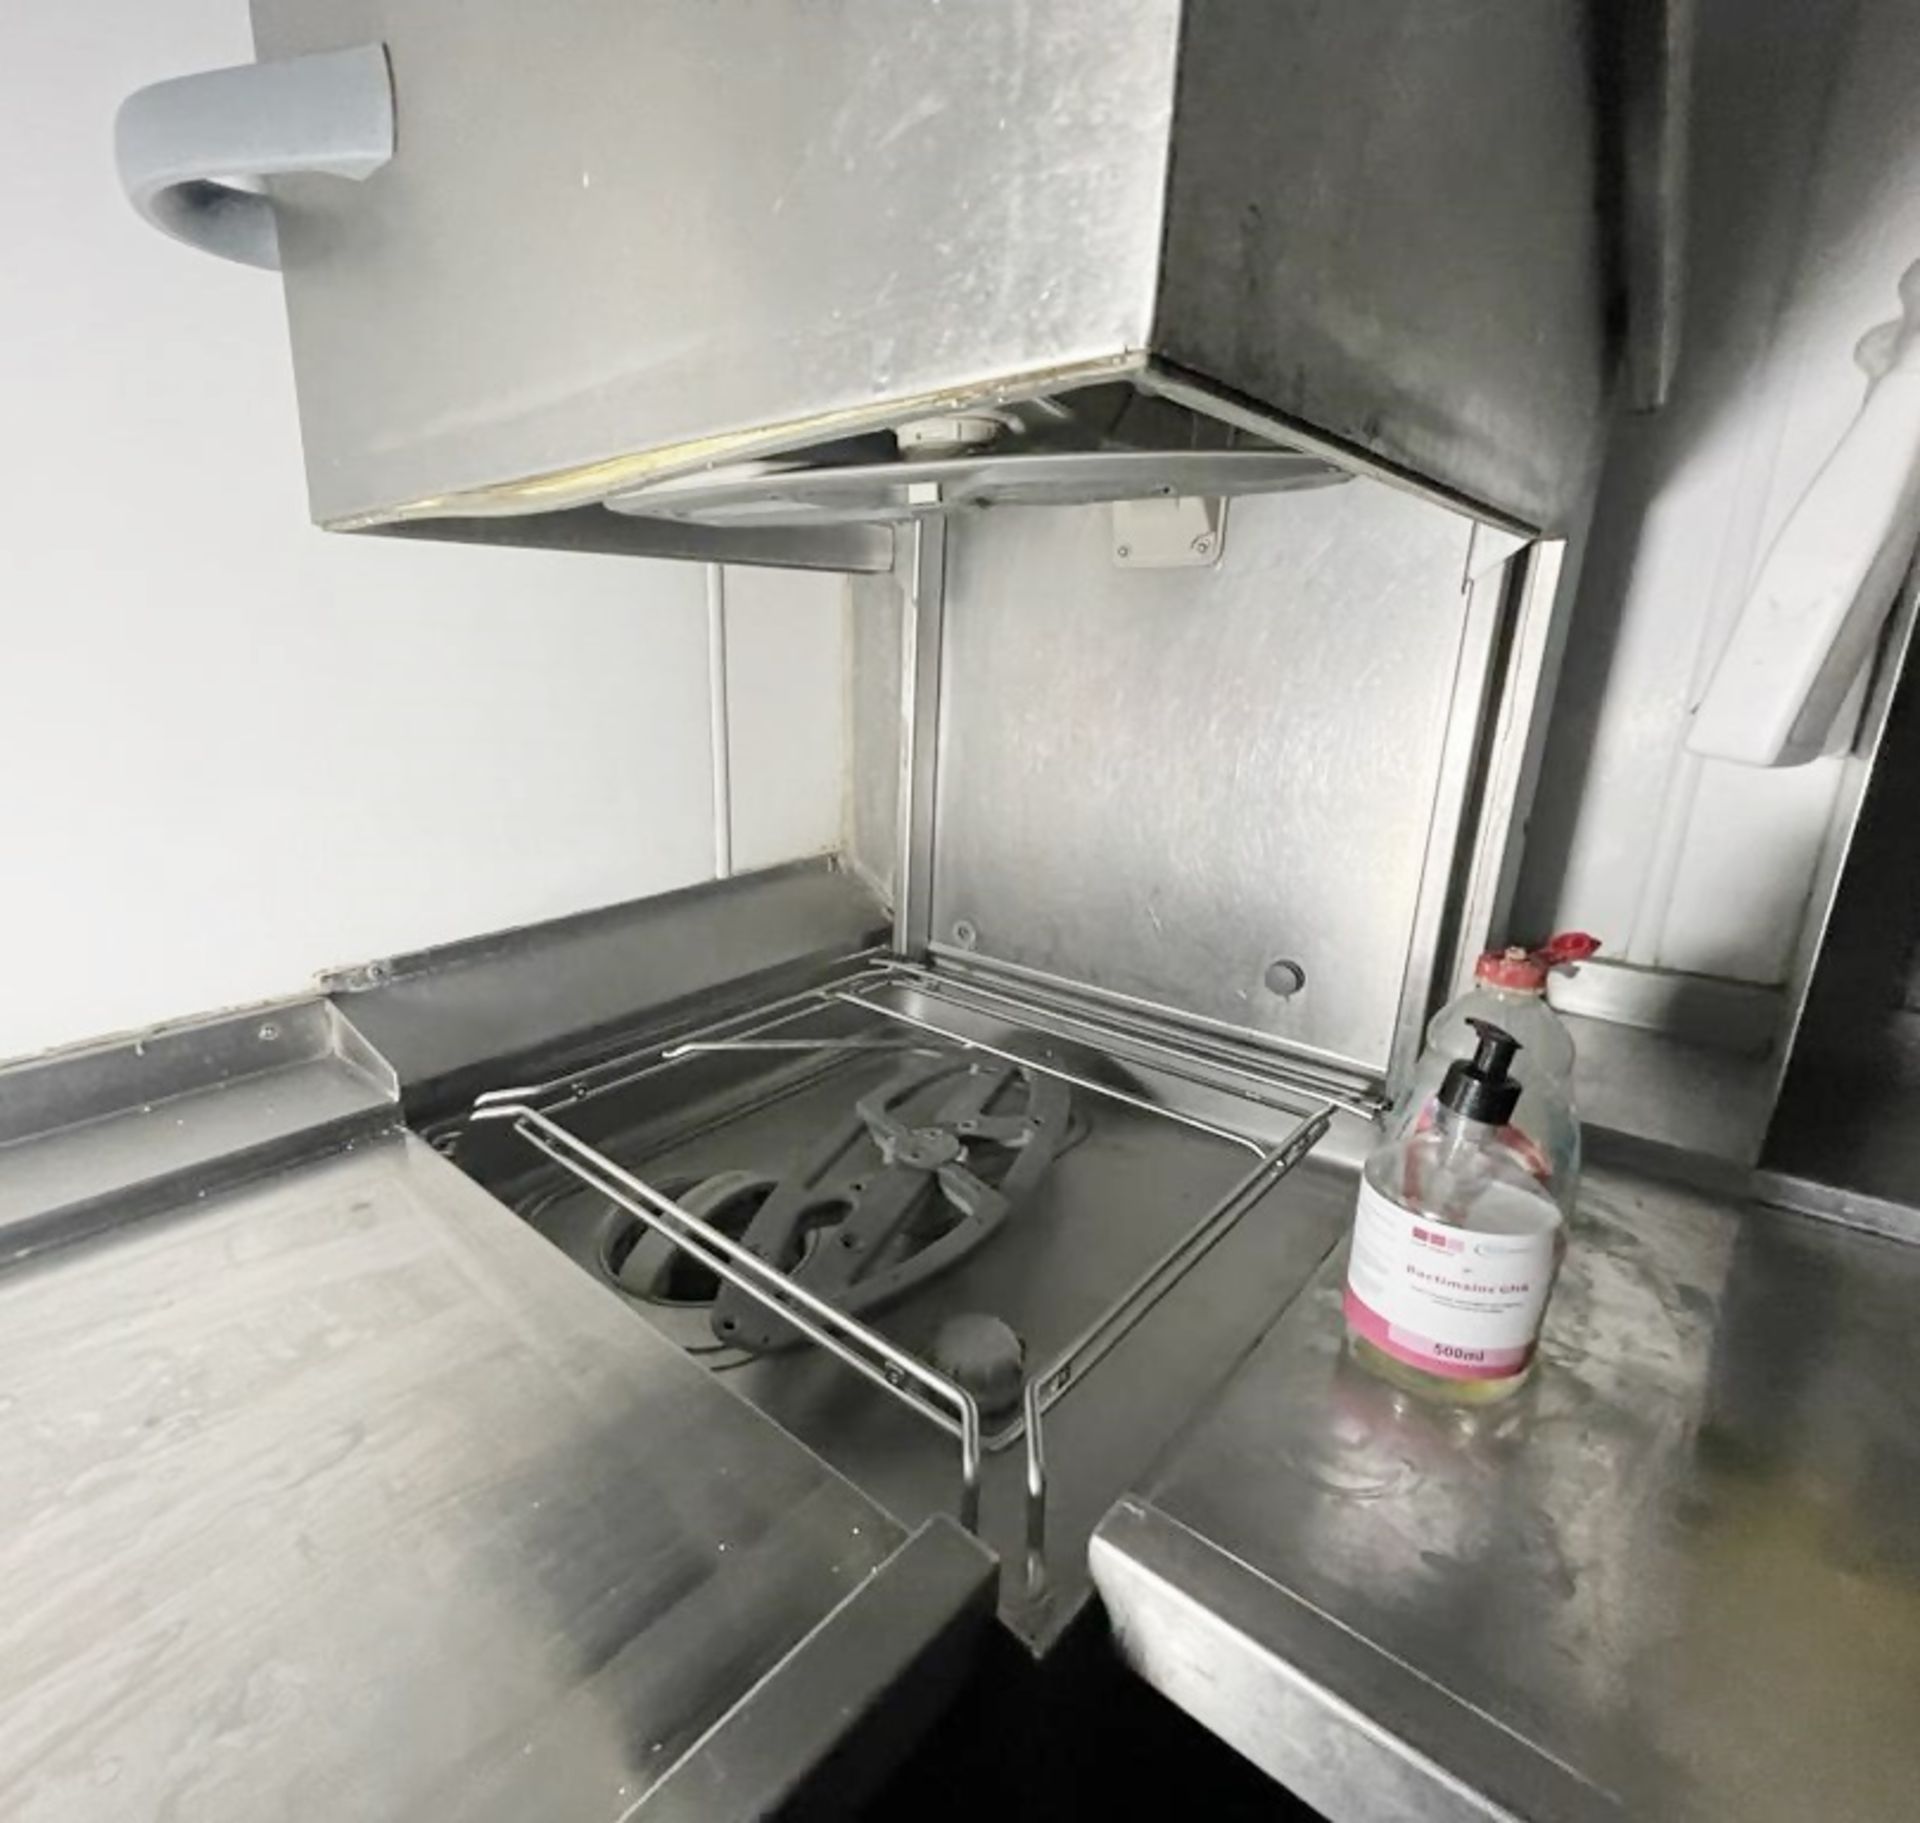 1 x Winterhalter PT-M Passthrough Dishwasher With Inlet and Outlet Table With Wash Basin and Spray - Image 4 of 15